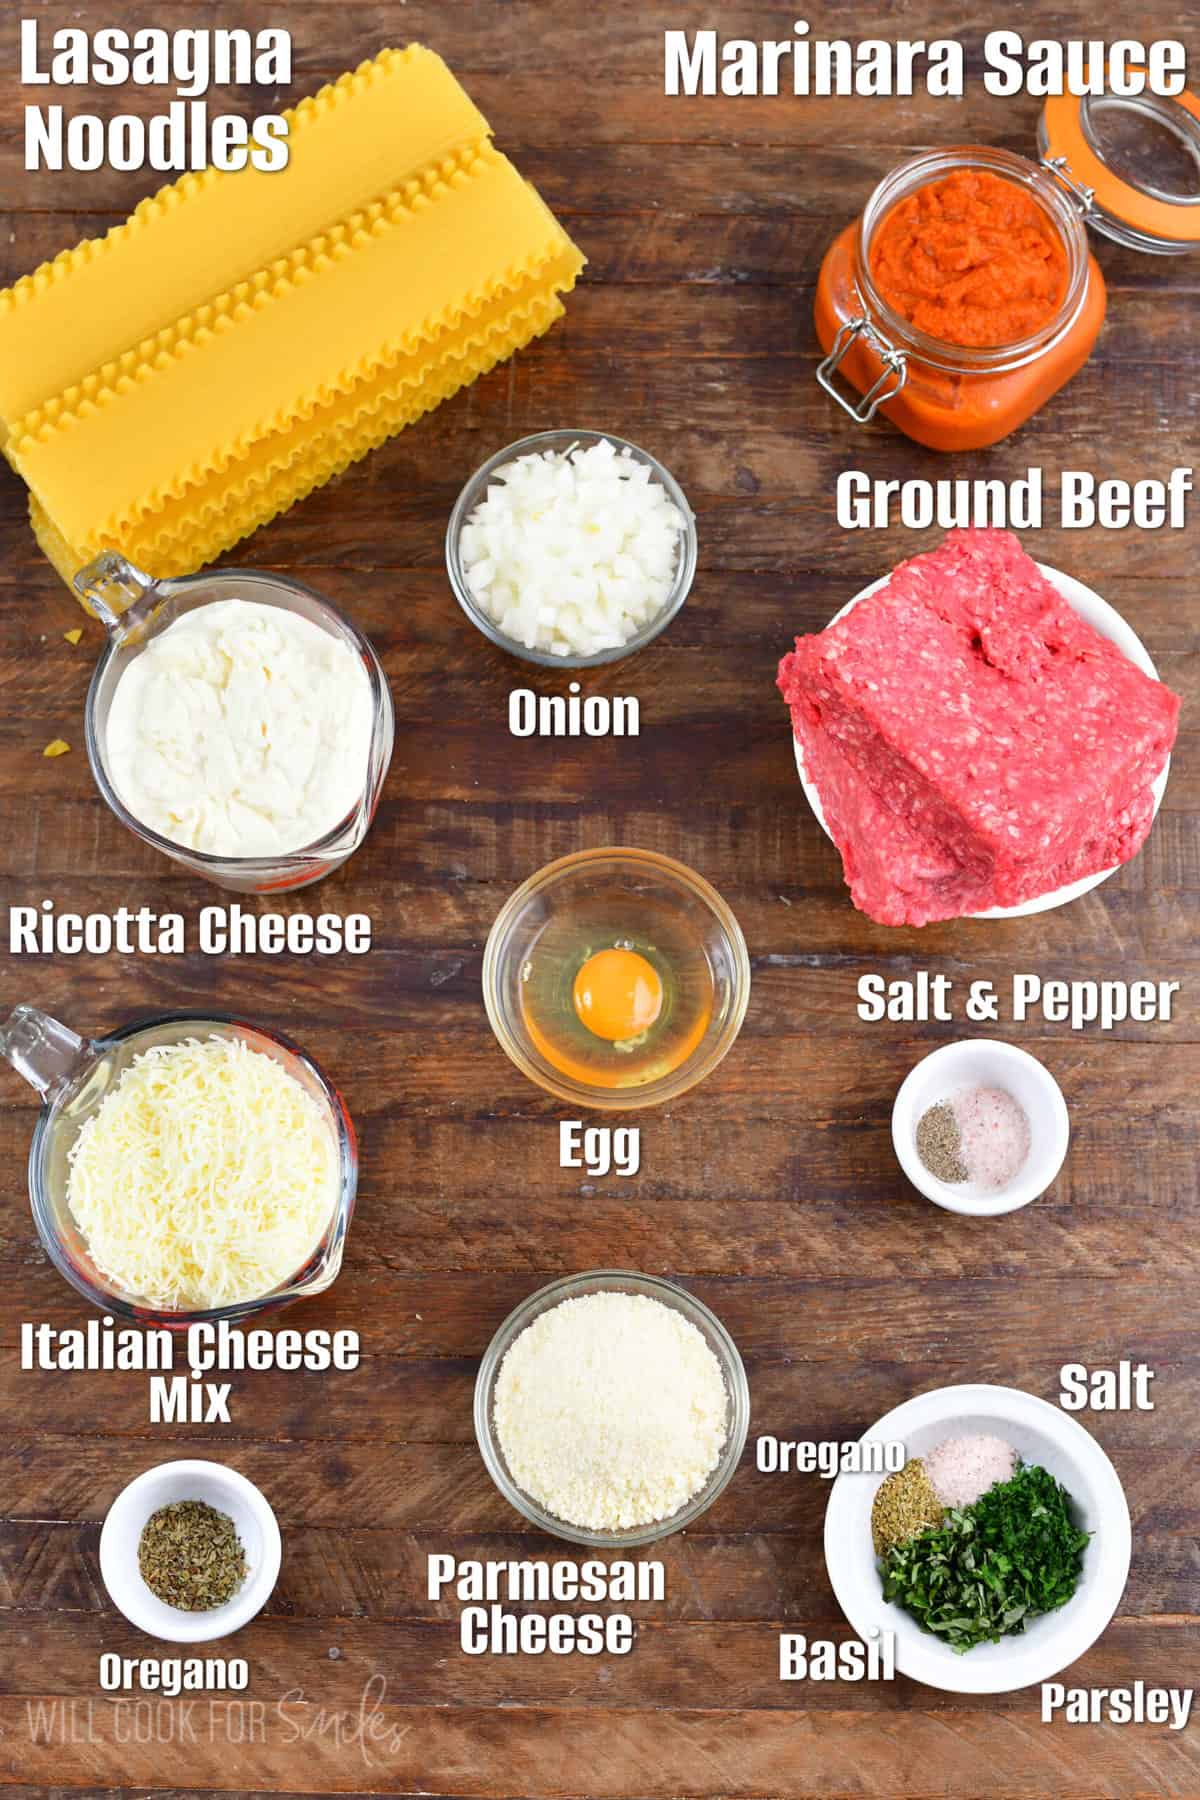 Labeled ingredients for lasagna on a wood surface.